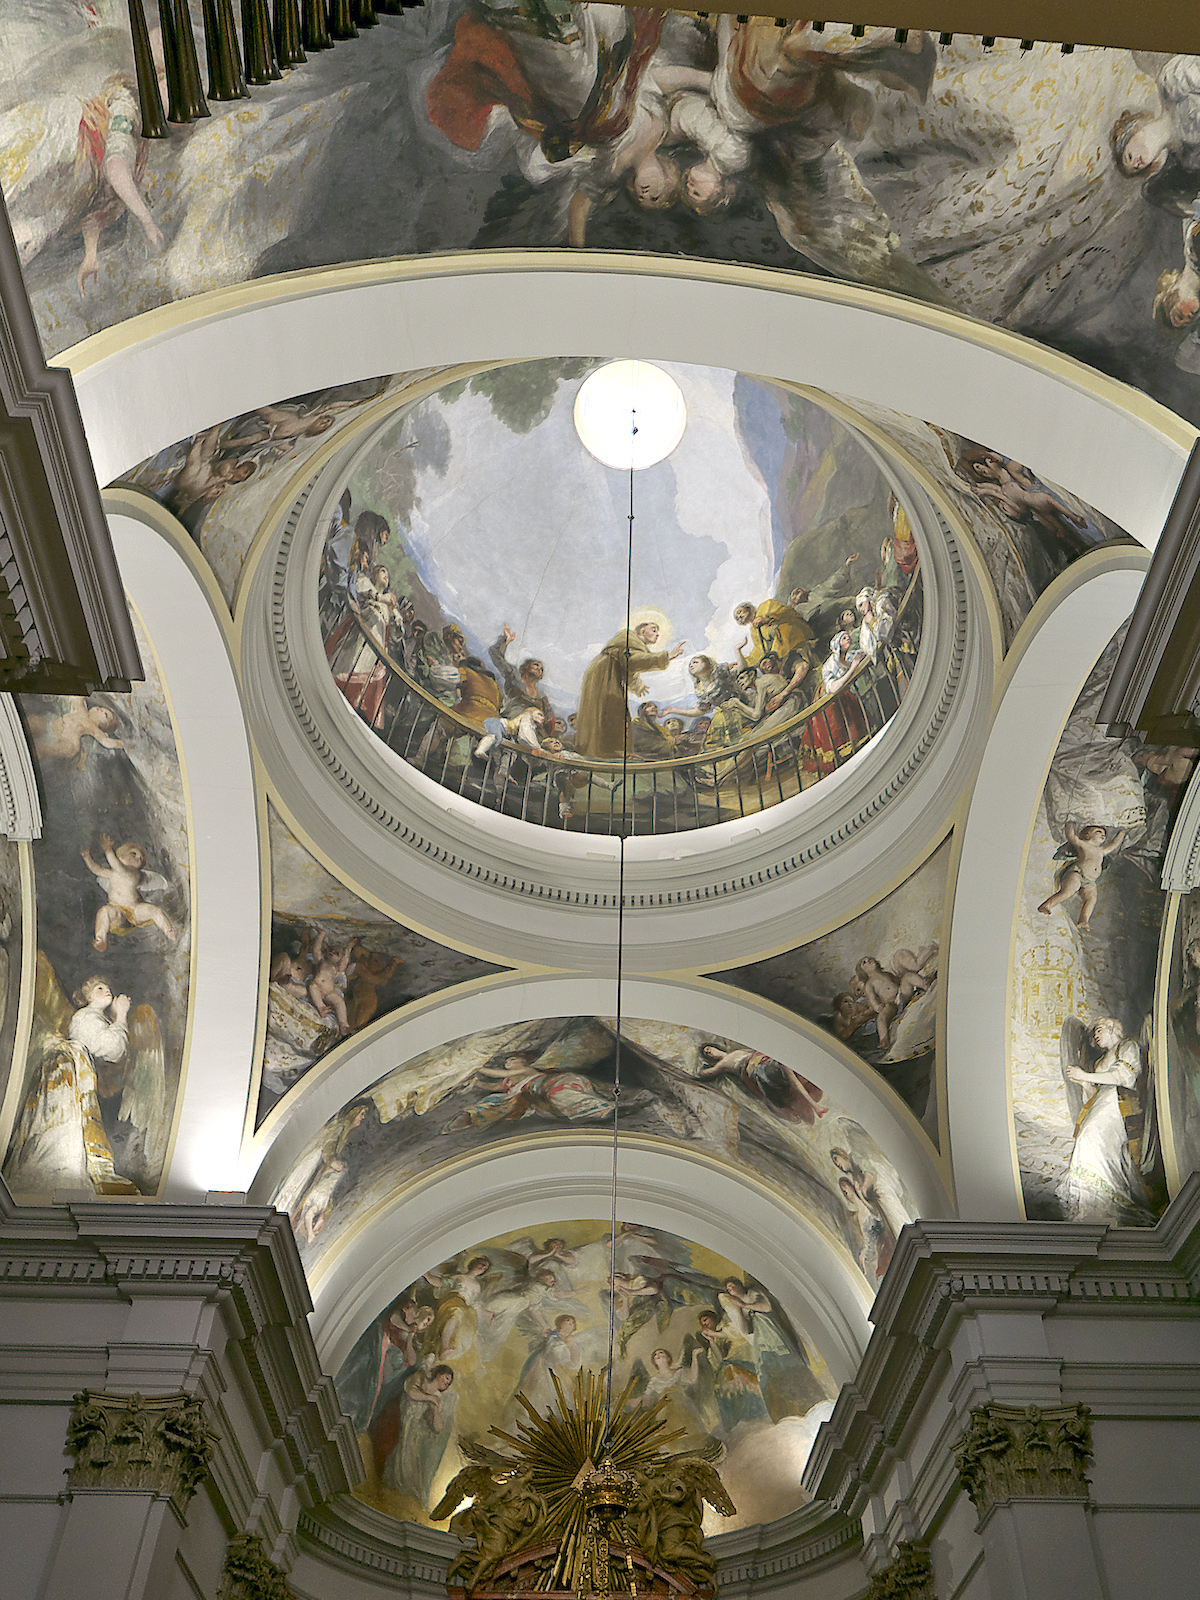 Ceiling frescoes depicting religious scenes and figures